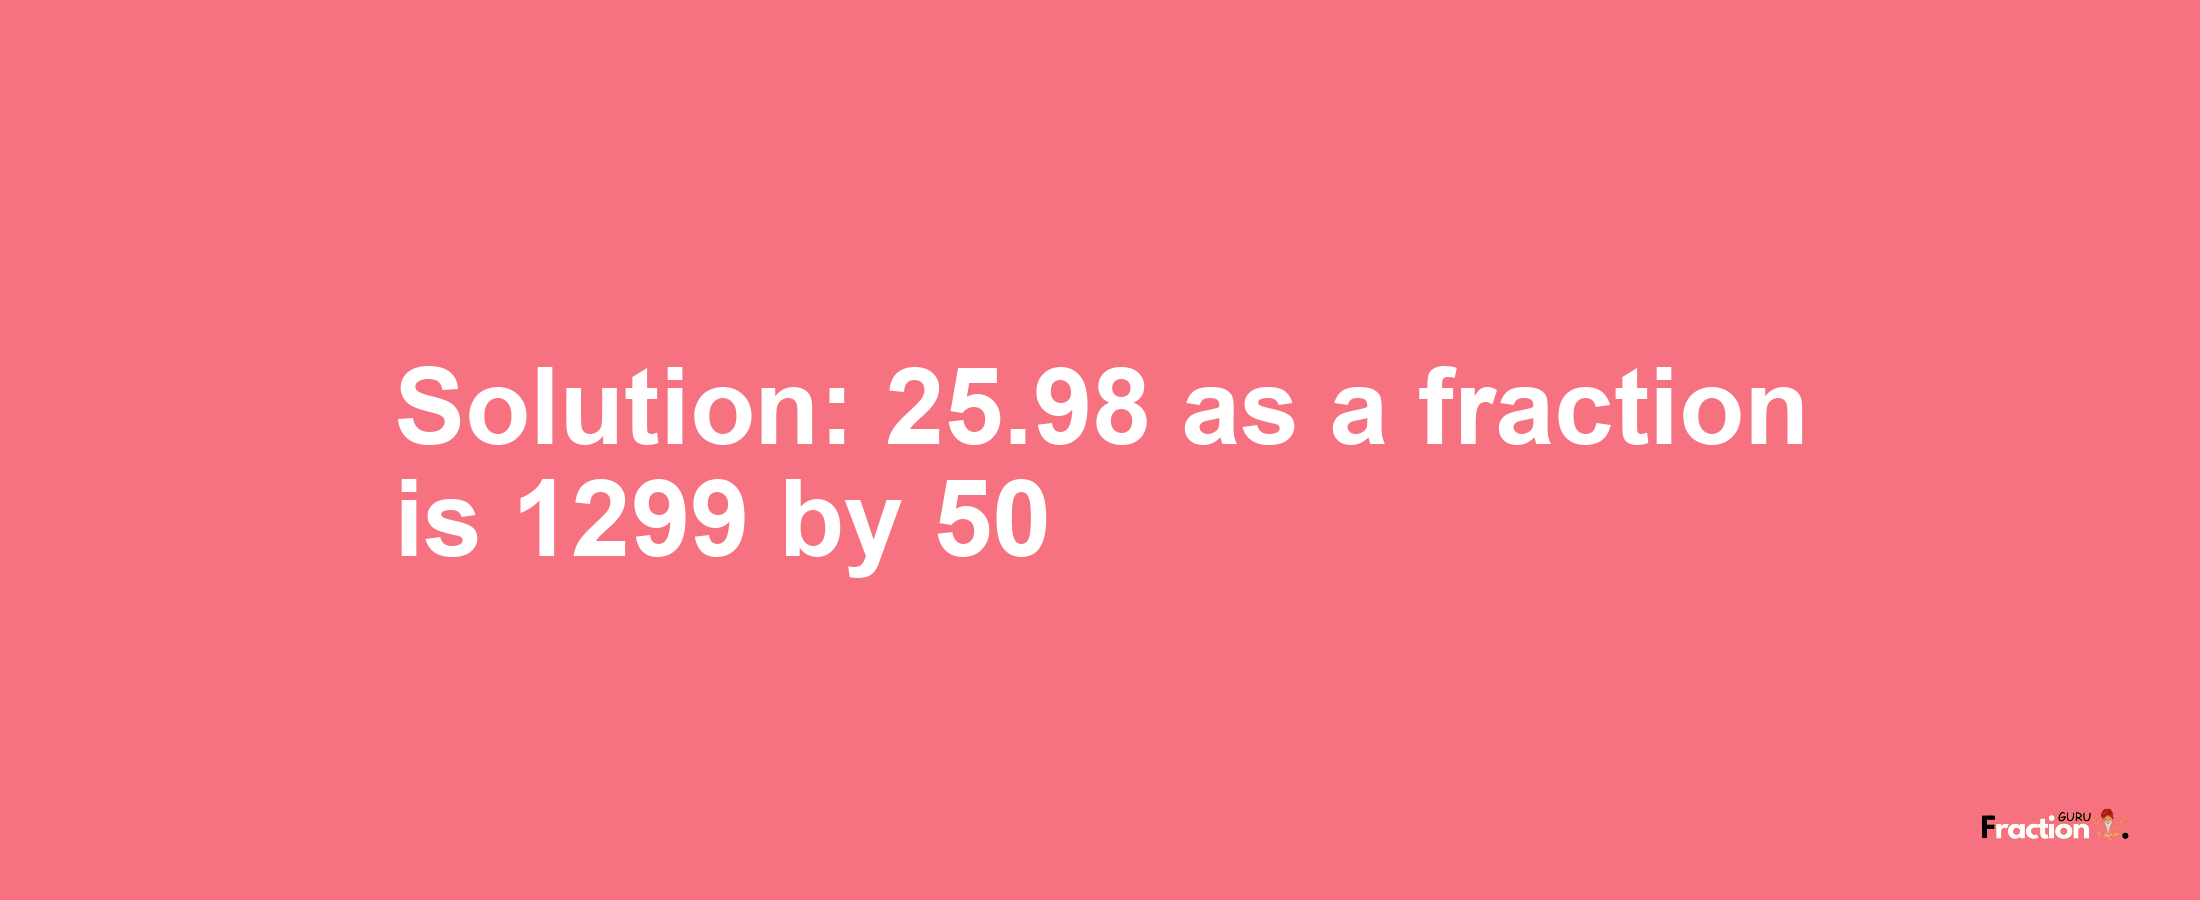 Solution:25.98 as a fraction is 1299/50